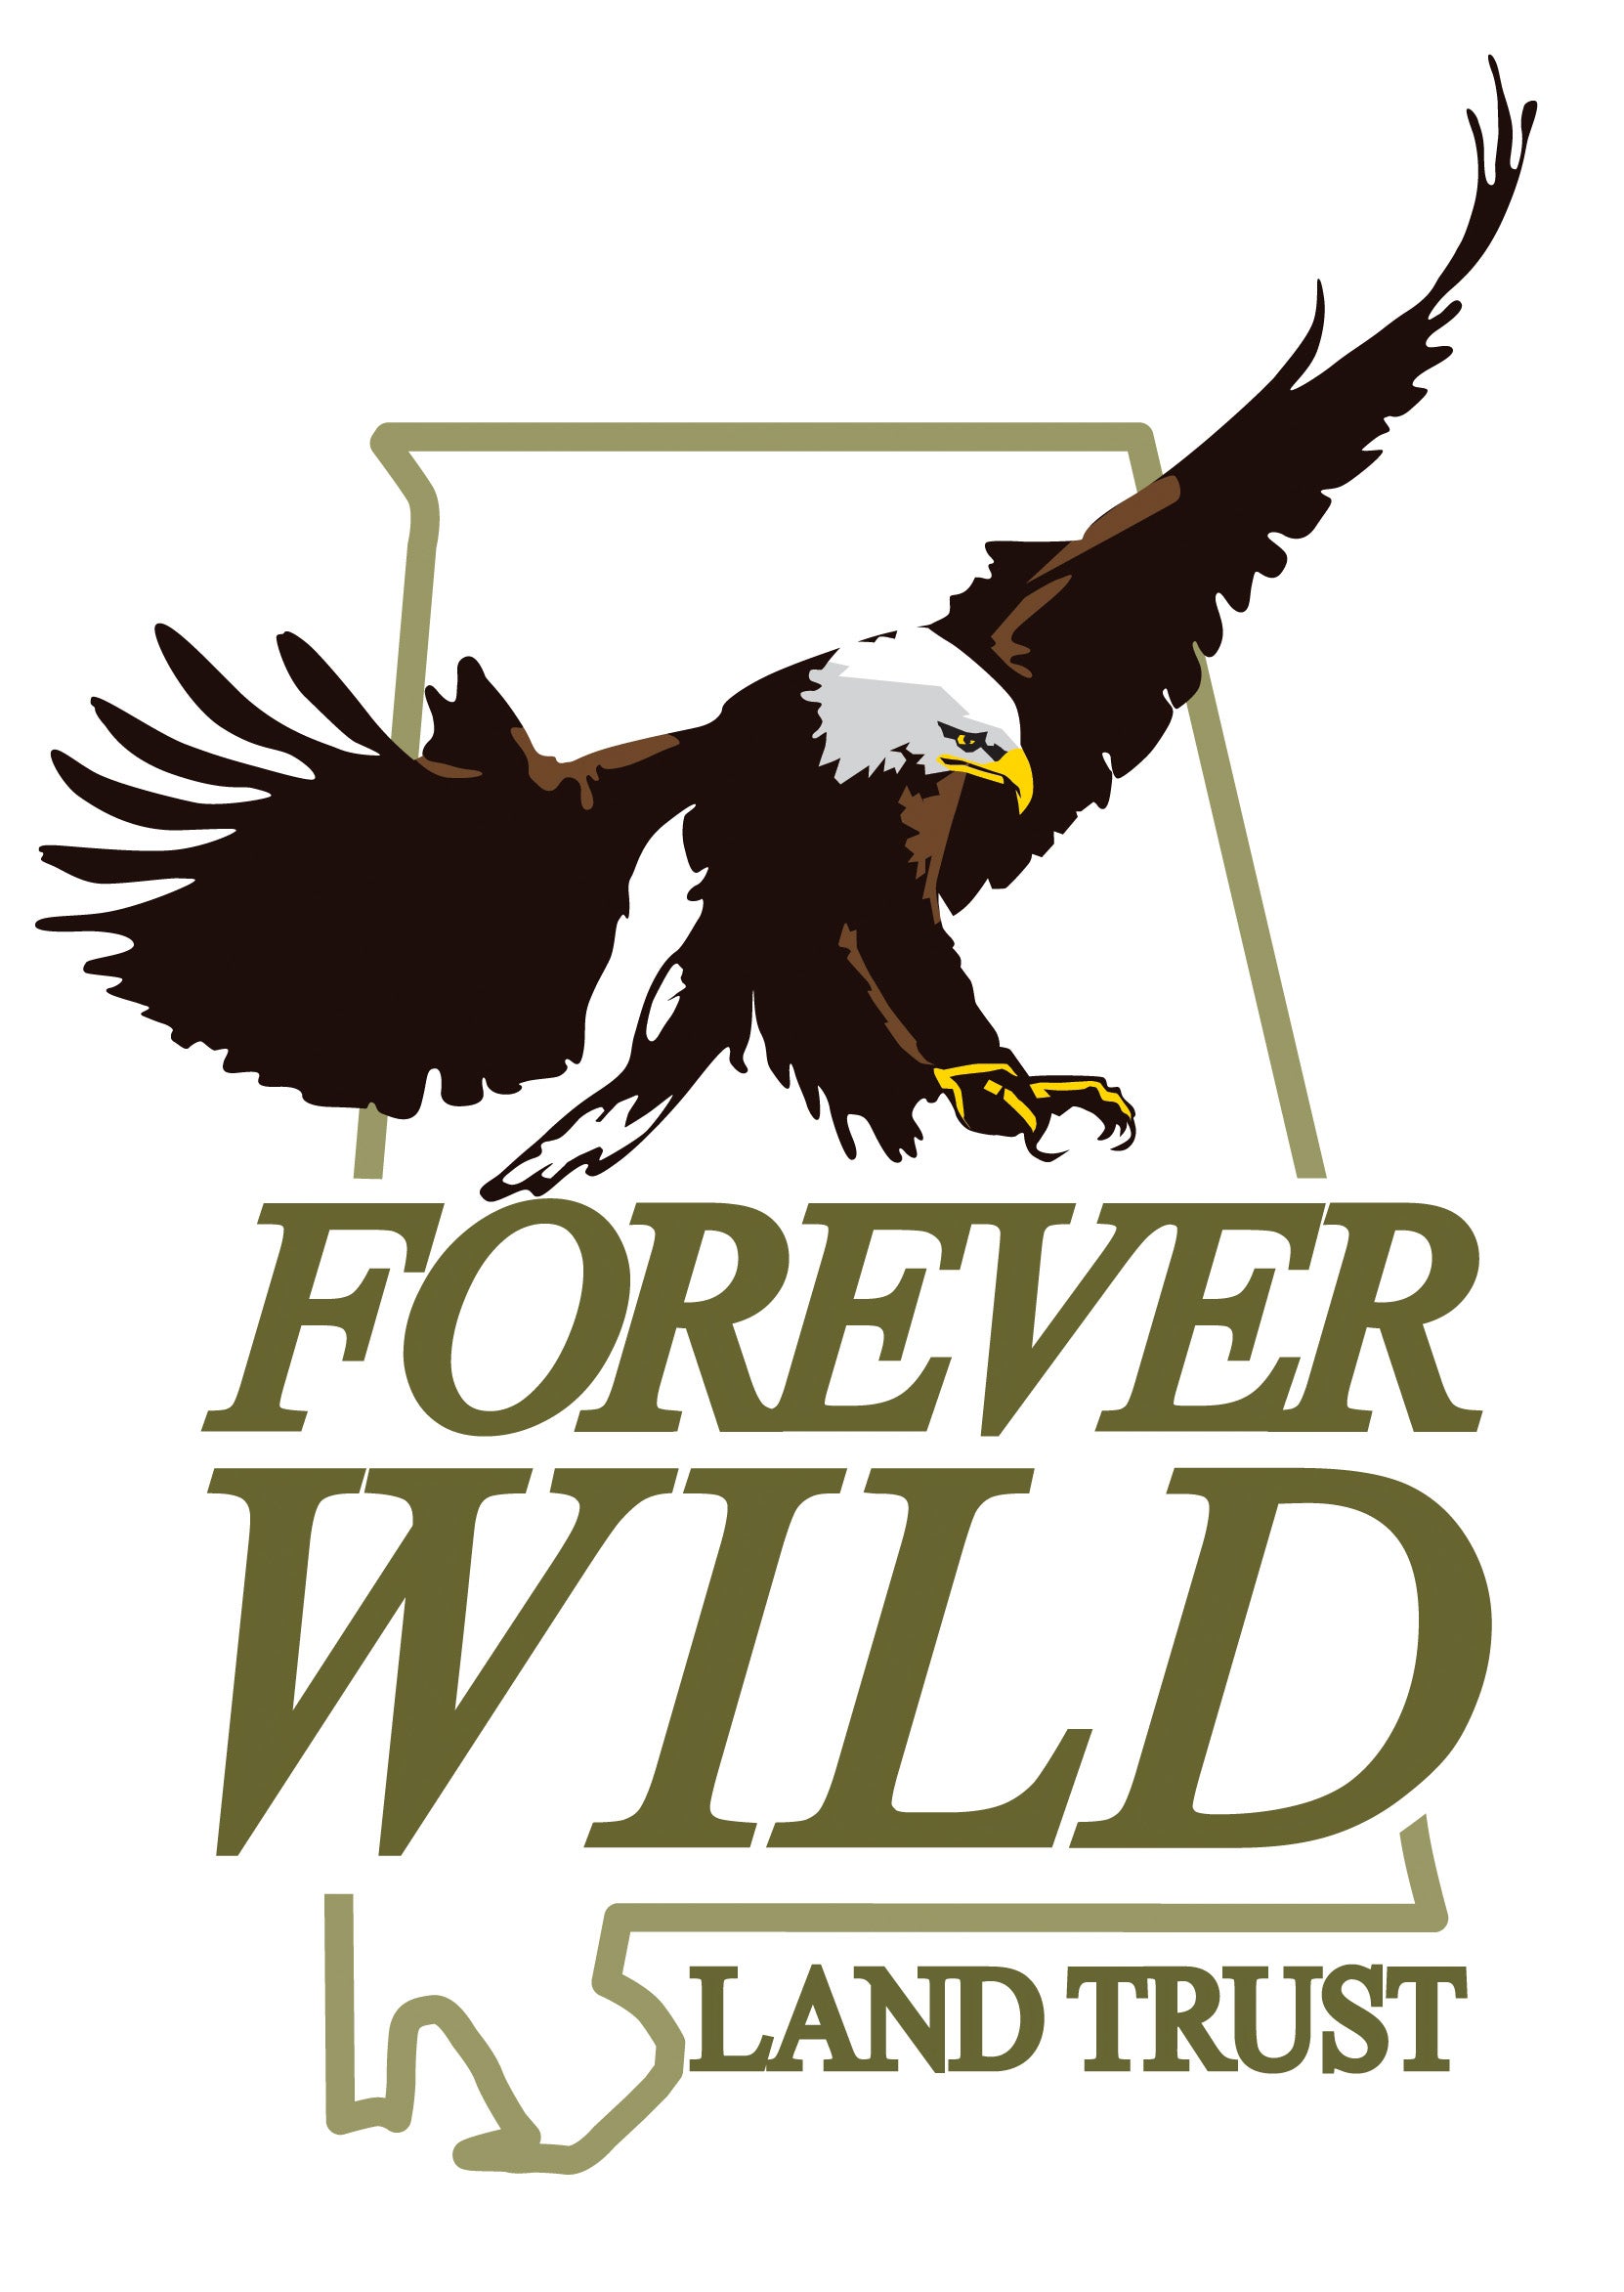 Forever Wild Board Meets in Guntersville on May 4